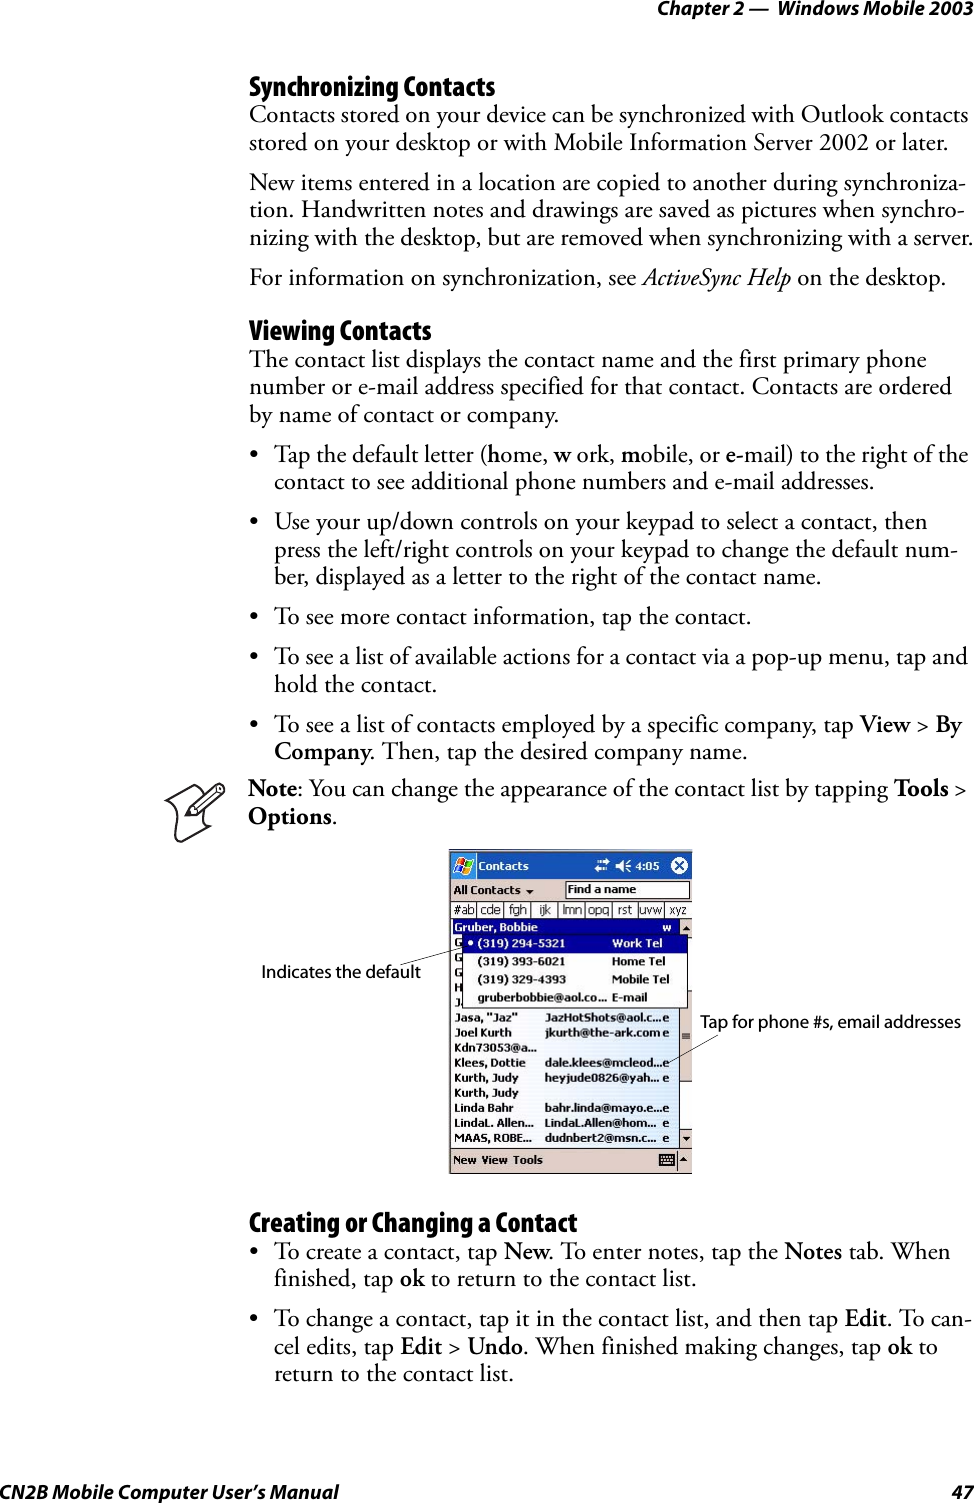 Chapter 2 —  Windows Mobile 2003CN2B Mobile Computer User’s Manual 47Synchronizing ContactsContacts stored on your device can be synchronized with Outlook contacts stored on your desktop or with Mobile Information Server 2002 or later.New items entered in a location are copied to another during synchroniza-tion. Handwritten notes and drawings are saved as pictures when synchro-nizing with the desktop, but are removed when synchronizing with a server.For information on synchronization, see ActiveSync Help on the desktop.Viewing ContactsThe contact list displays the contact name and the first primary phone number or e-mail address specified for that contact. Contacts are ordered by name of contact or company.• Tap the default letter (home, w ork, mobile, or e-mail) to the right of the contact to see additional phone numbers and e-mail addresses.• Use your up/down controls on your keypad to select a contact, then press the left/right controls on your keypad to change the default num-ber, displayed as a letter to the right of the contact name.• To see more contact information, tap the contact.• To see a list of available actions for a contact via a pop-up menu, tap and hold the contact.• To see a list of contacts employed by a specific company, tap View &gt; By Company. Then, tap the desired company name.Creating or Changing a Contact• To create a contact, tap New. To enter notes, tap the Notes tab. When finished, tap ok to return to the contact list.• To change a contact, tap it in the contact list, and then tap Edit. To can-cel edits, tap Edit &gt; Undo. When finished making changes, tap ok to return to the contact list.Note: You can change the appearance of the contact list by tapping To o l s &gt; Options.Indicates the defaultTap for phone #s, email addresses